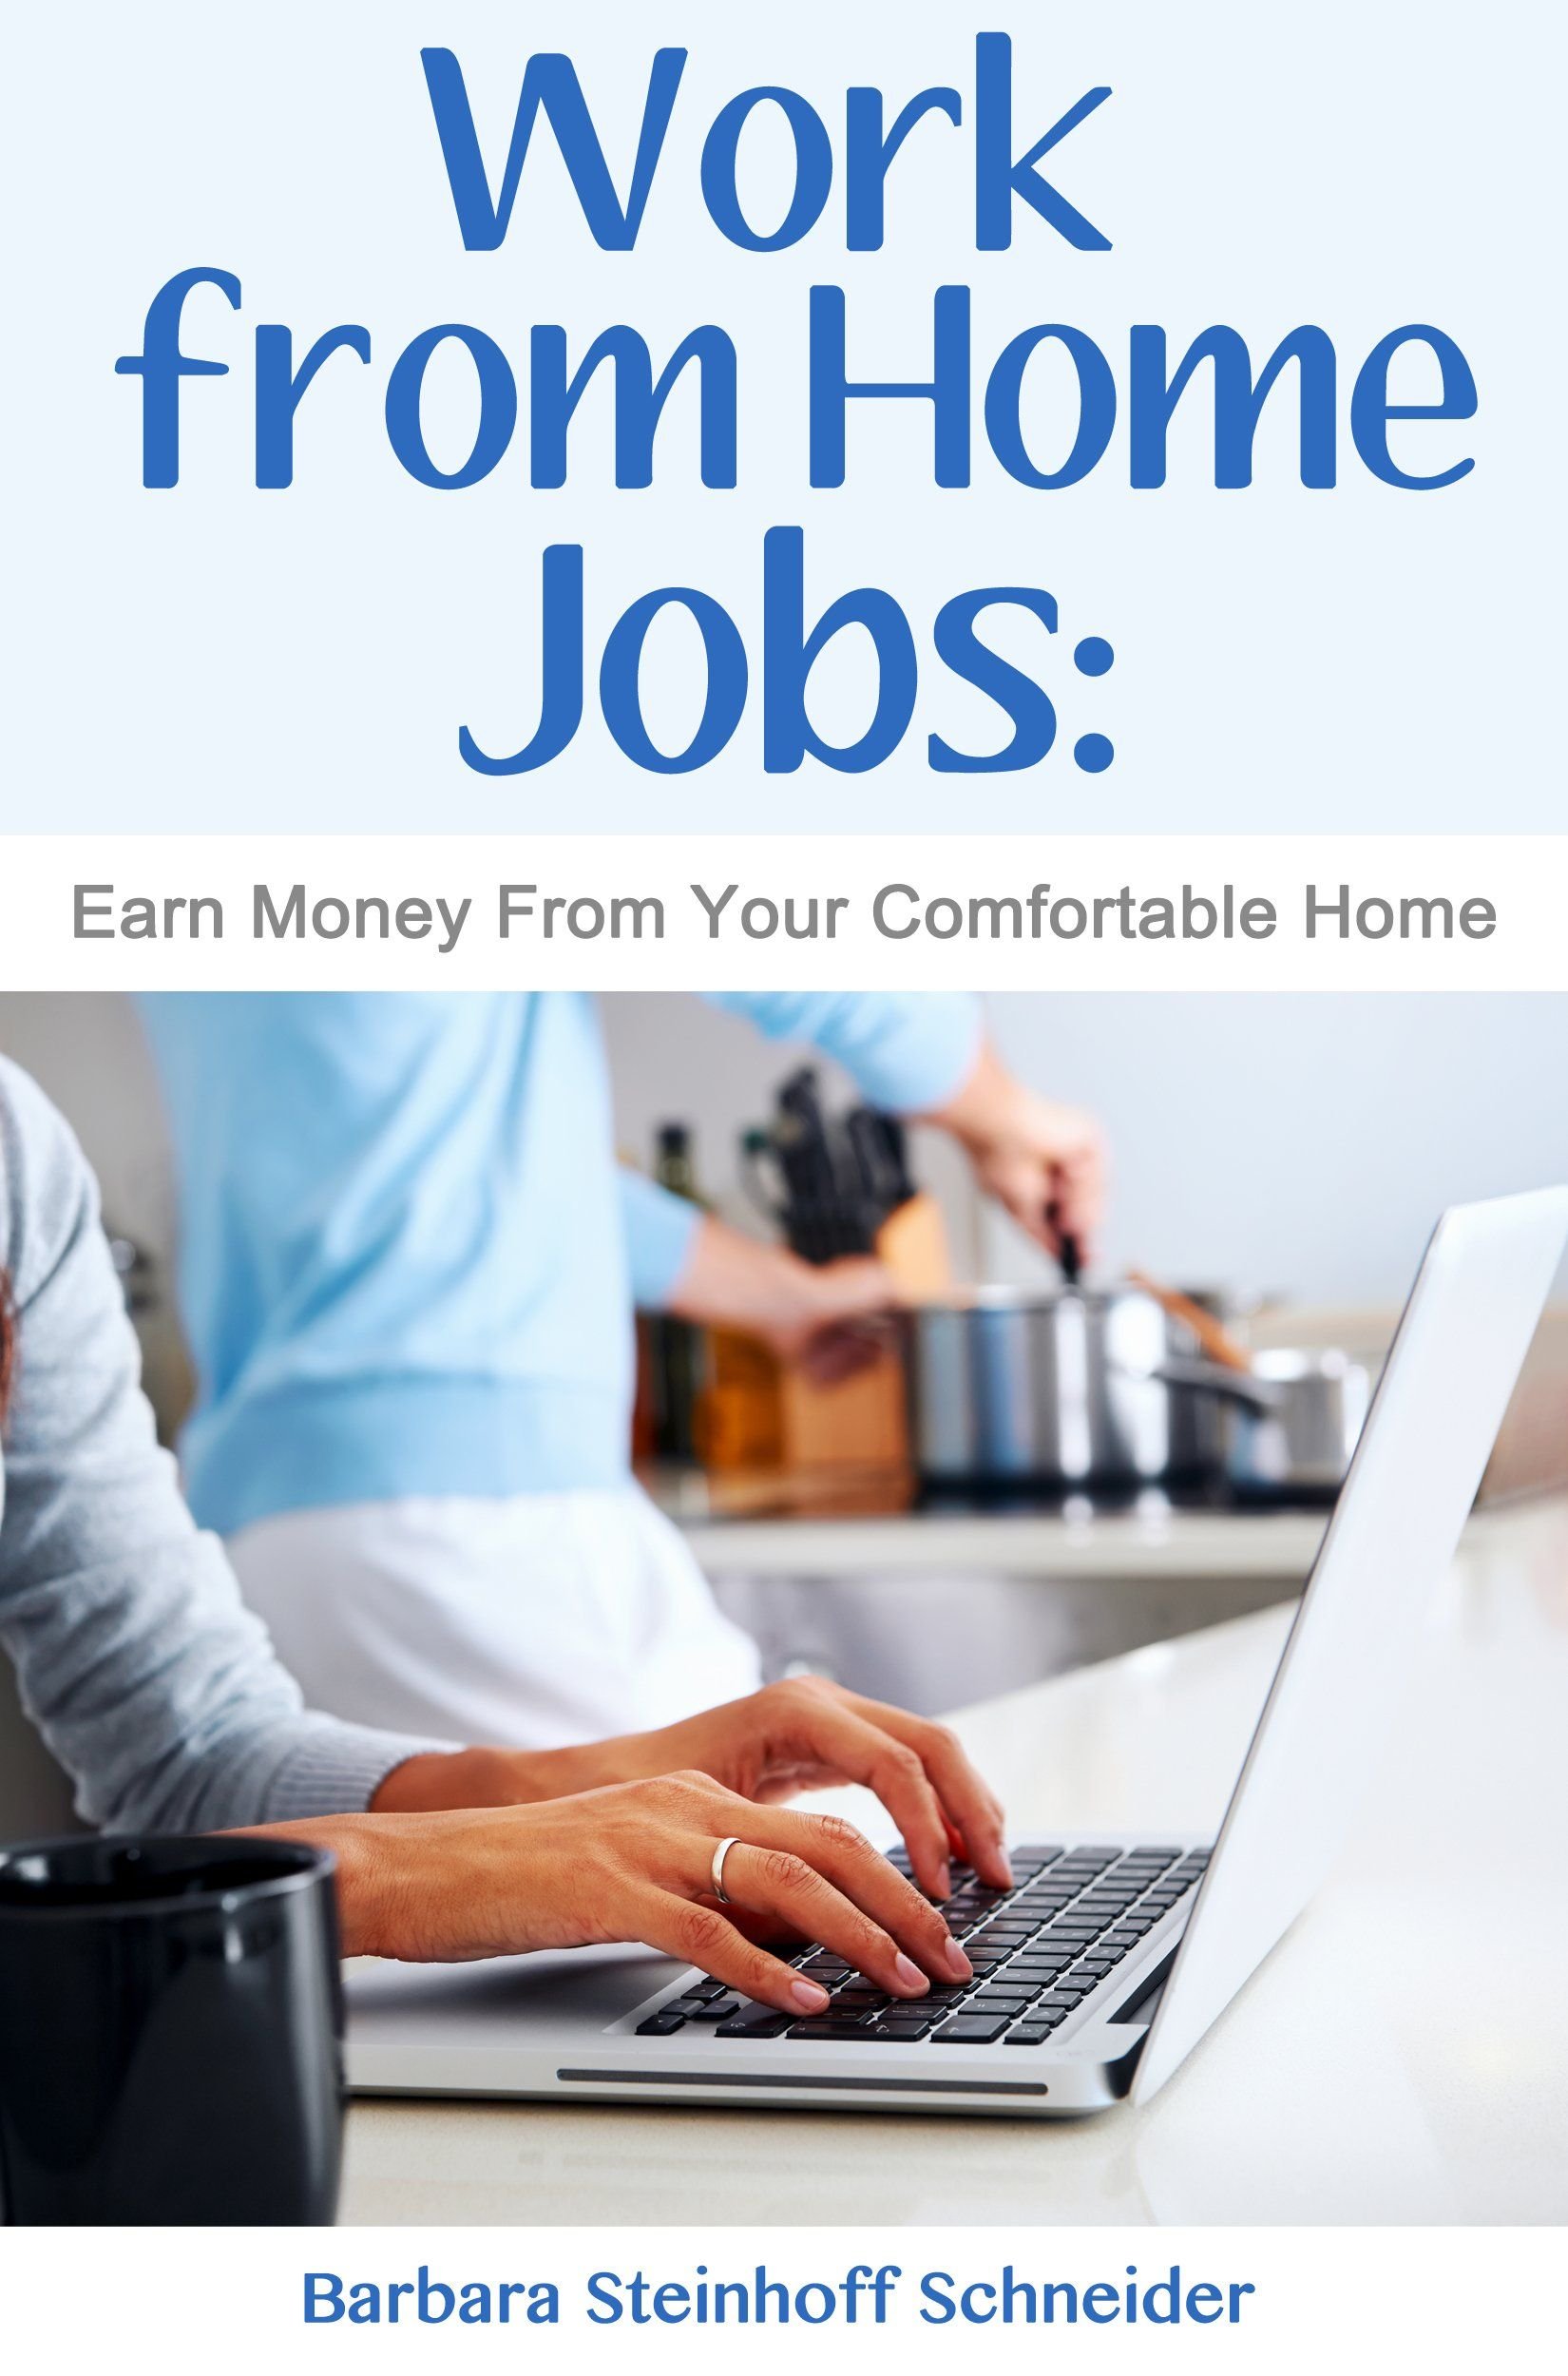 12 pass work from home jobs